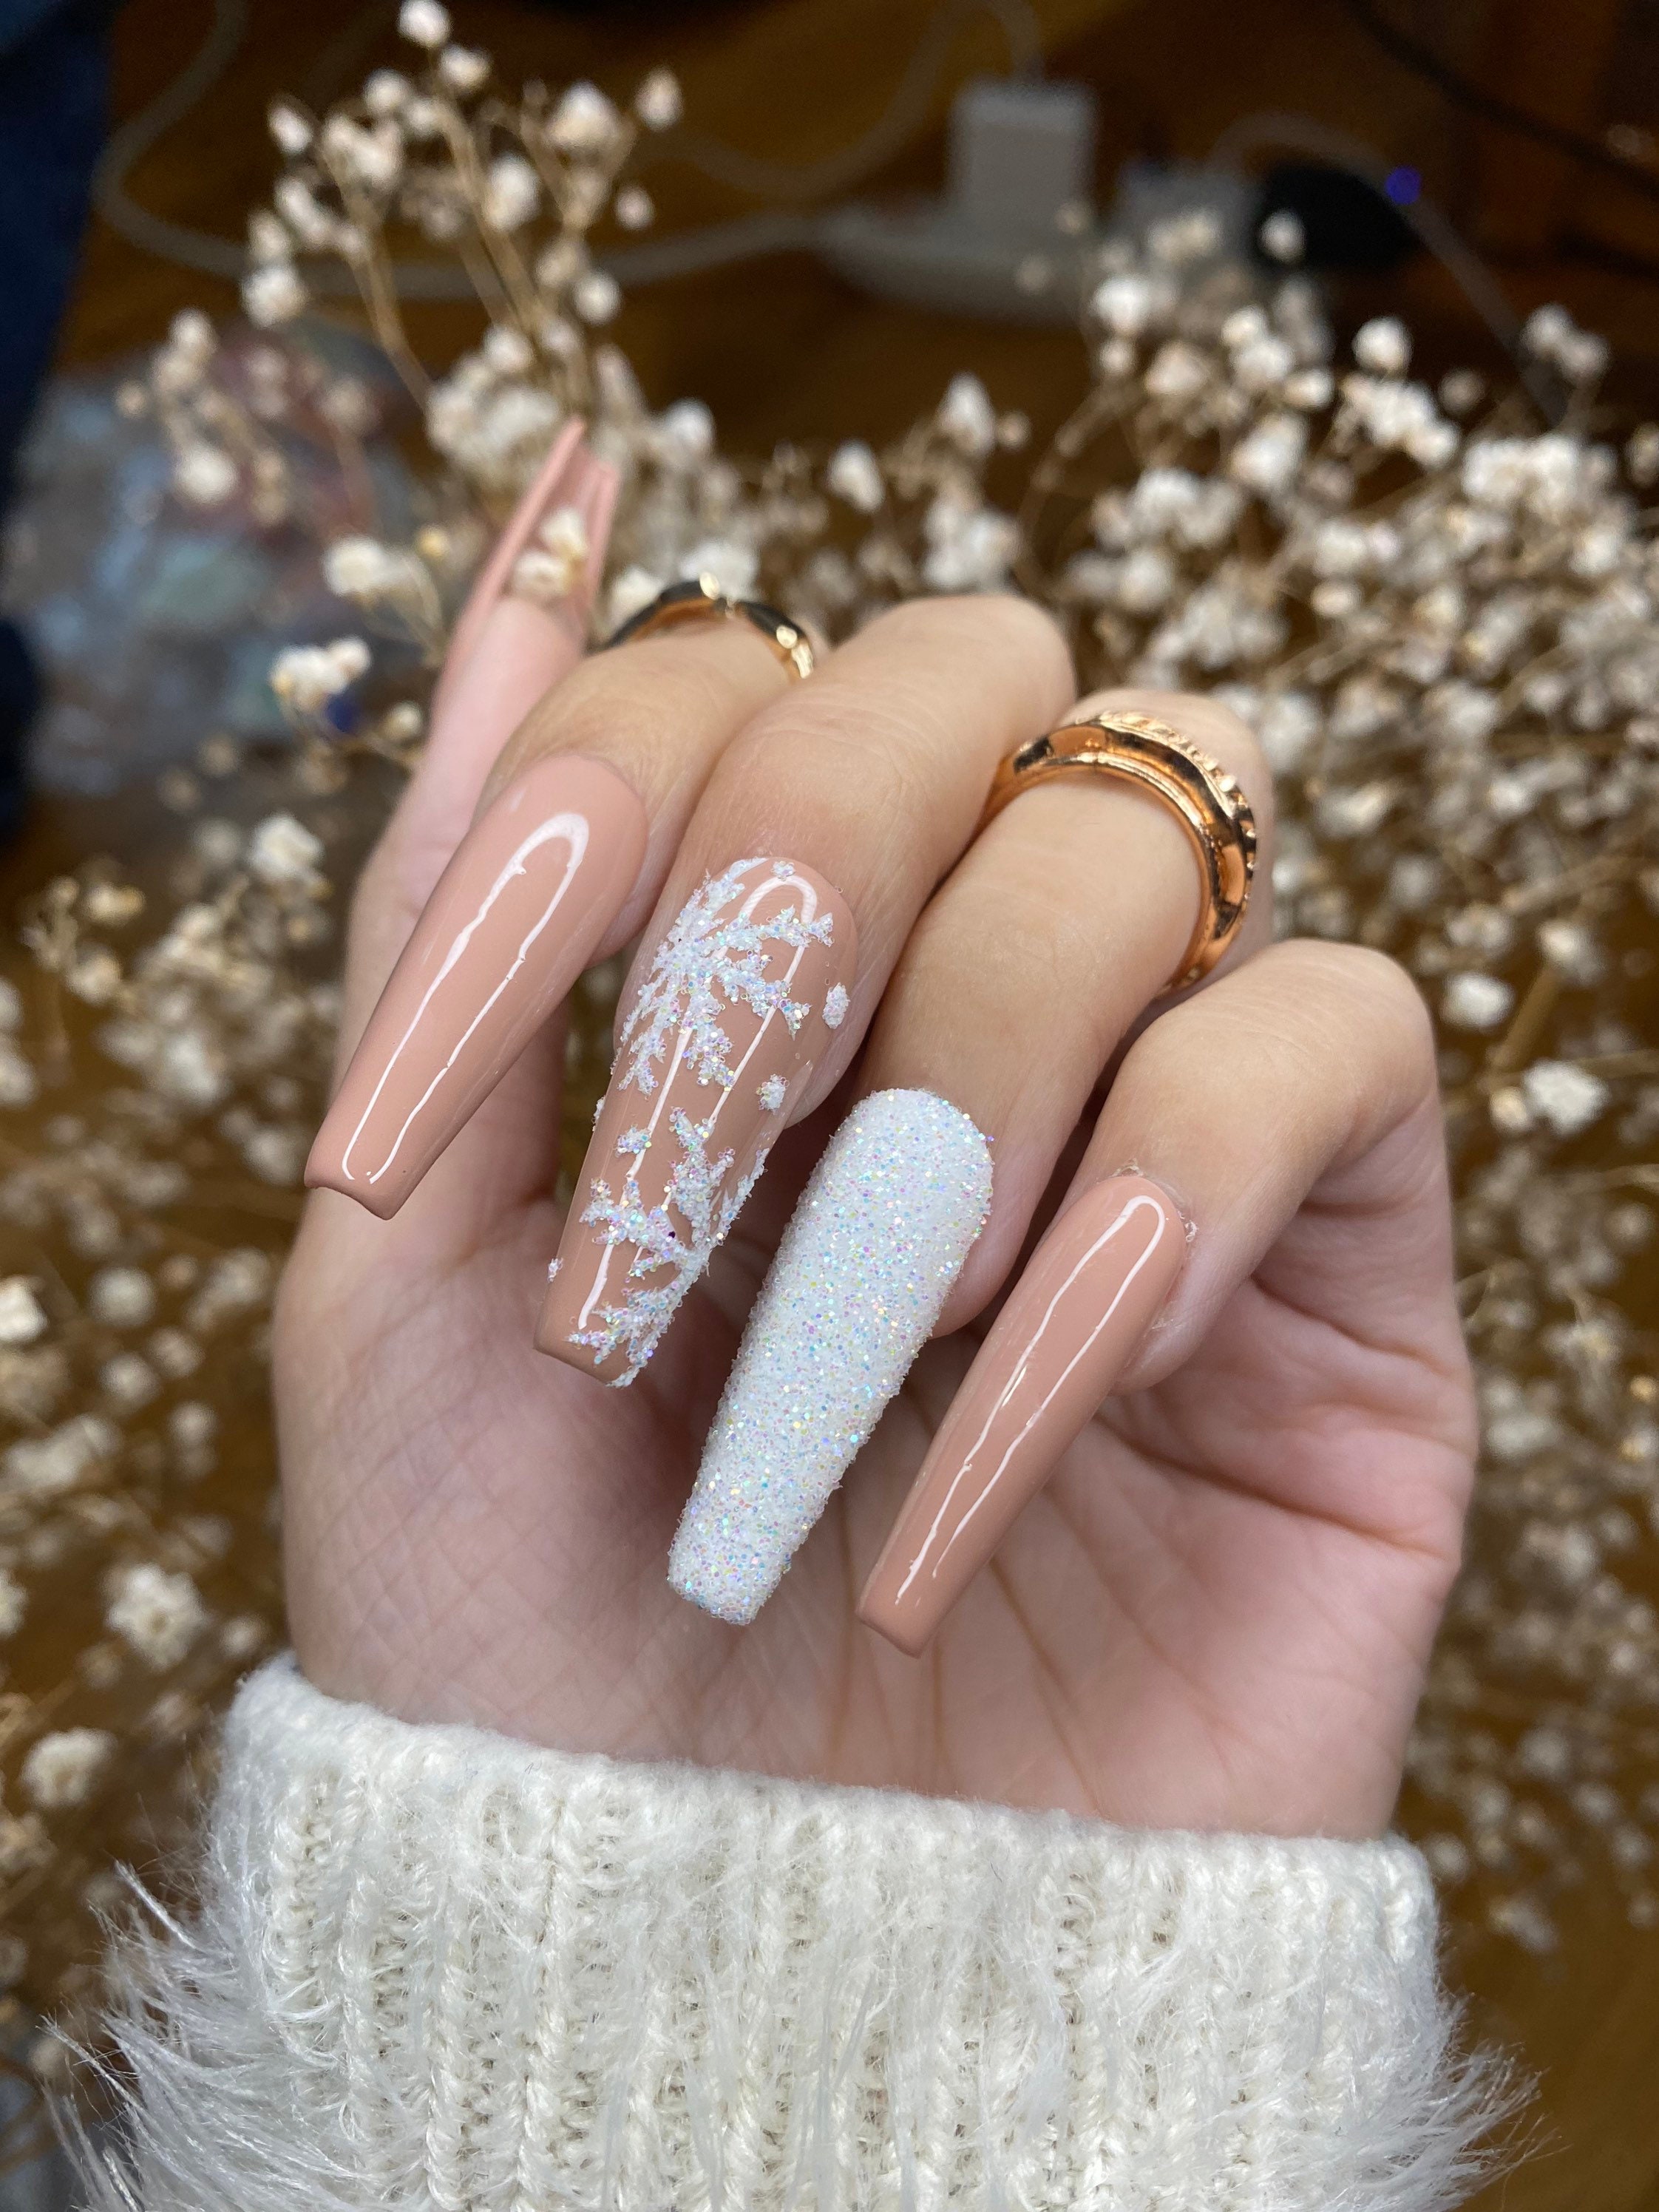 Nude Glitter Nails With Rhinestones – Trendy Things To Buy